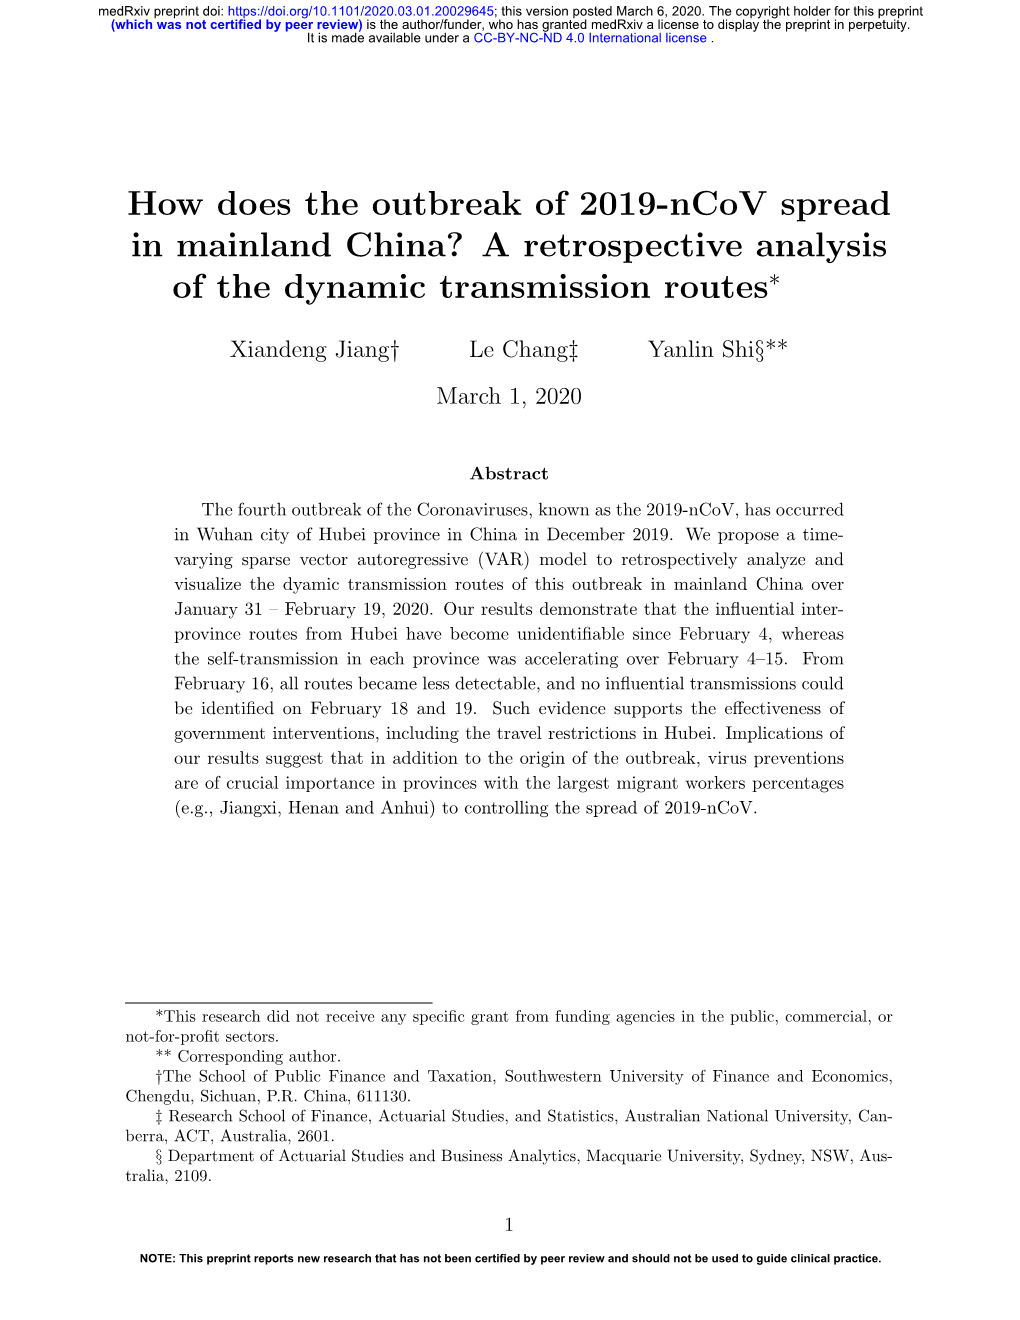 How Does the Outbreak of 2019-Ncov Spread in Mainland China? a Retrospective Analysis of the Dynamic Transmission Routes∗